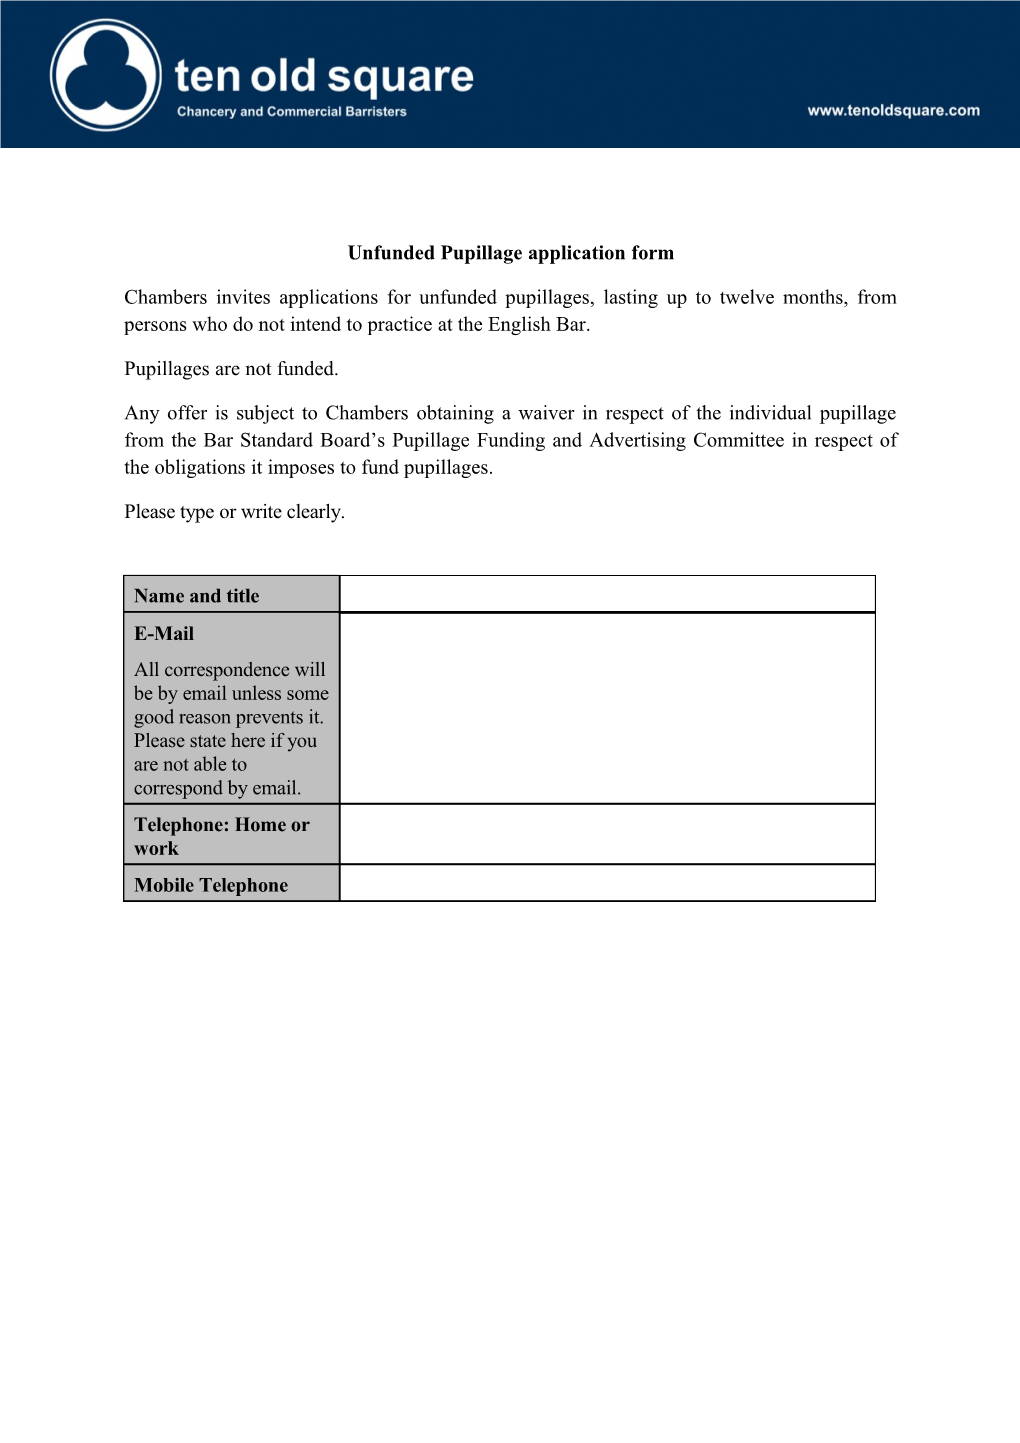 Unfunded Pupillage Application Form